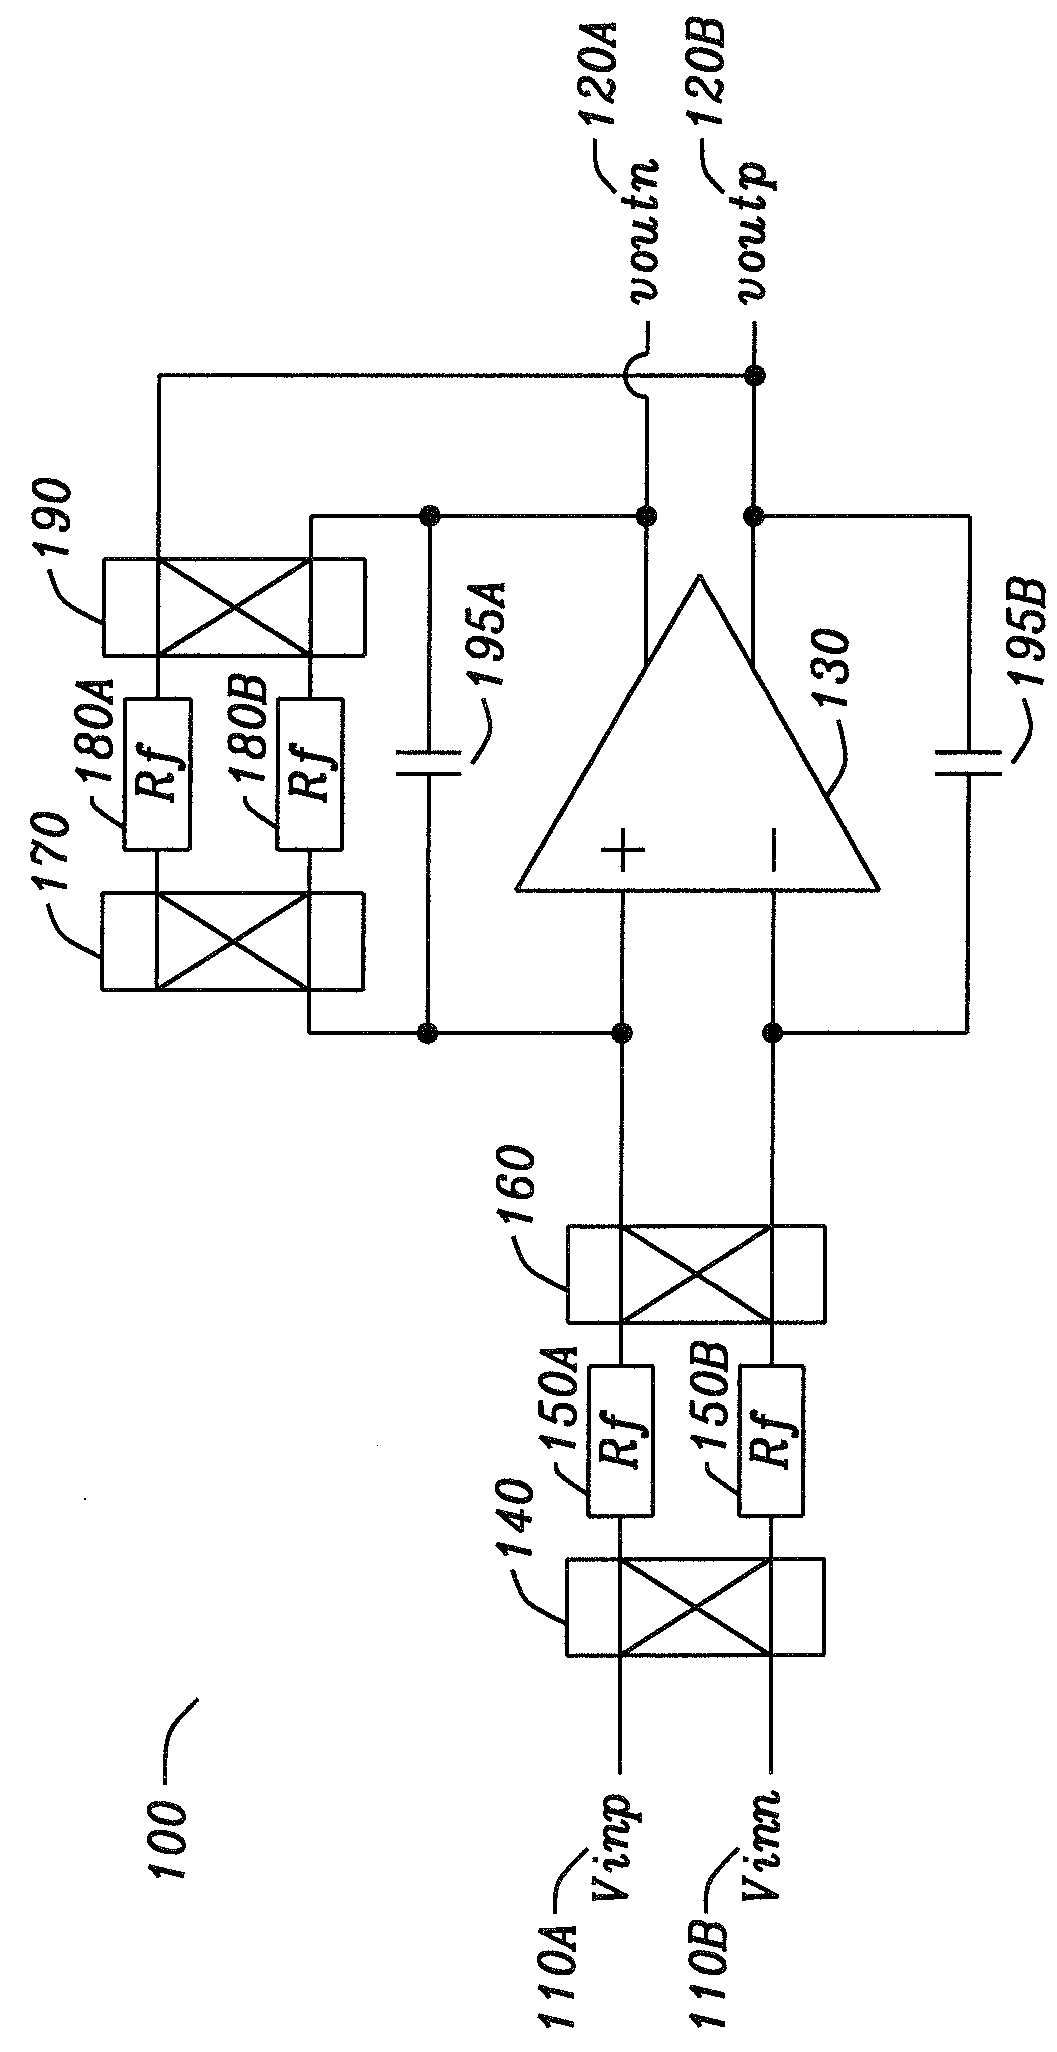 Circuit and Method for a High Common Mode Rejection Amplifier by Using a Digitally Controlled Gain Trim Circuit